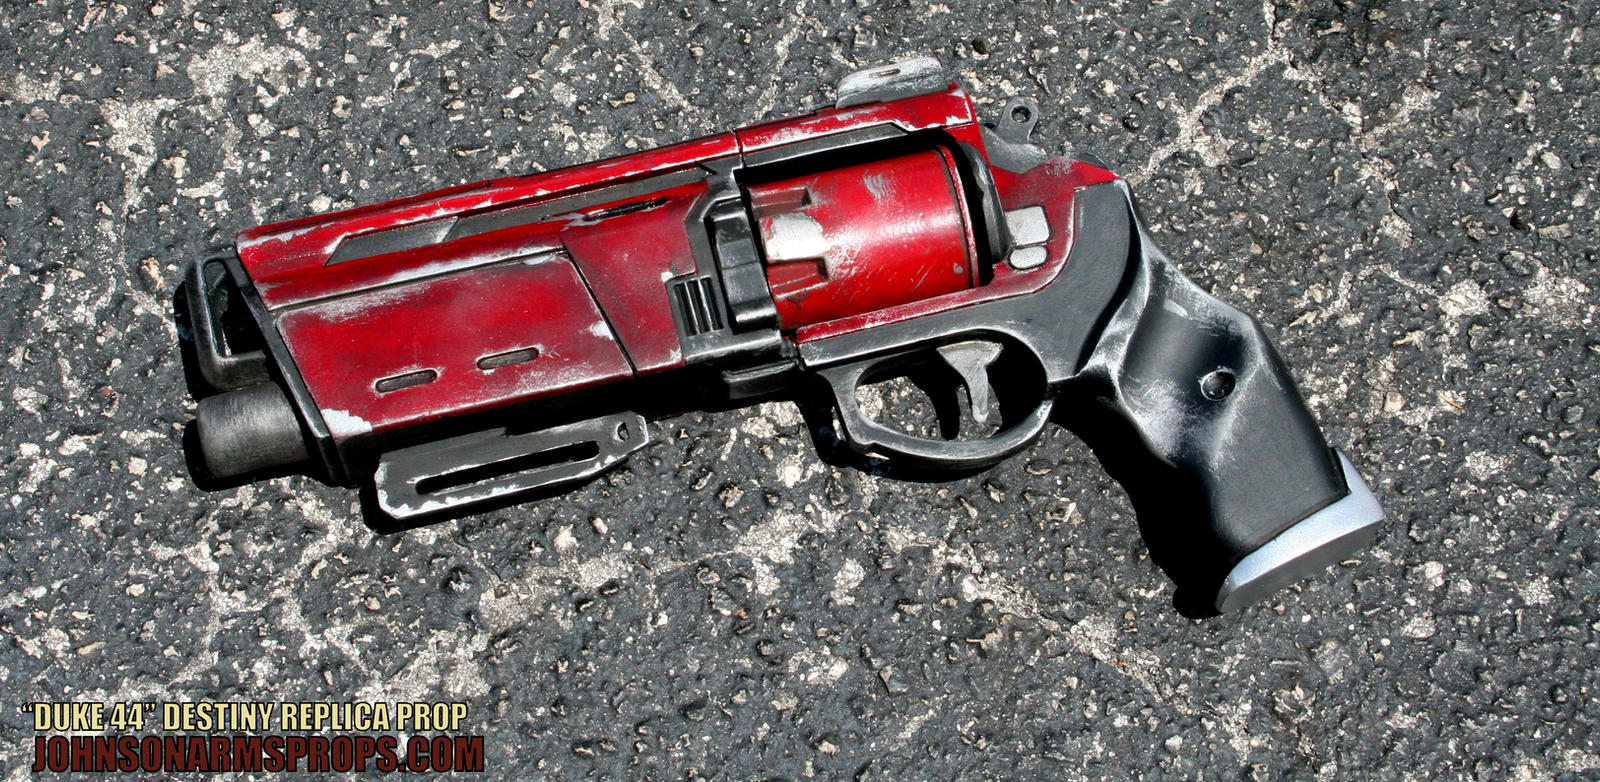 FINISHED Duke 44 Replica from the game Destiny